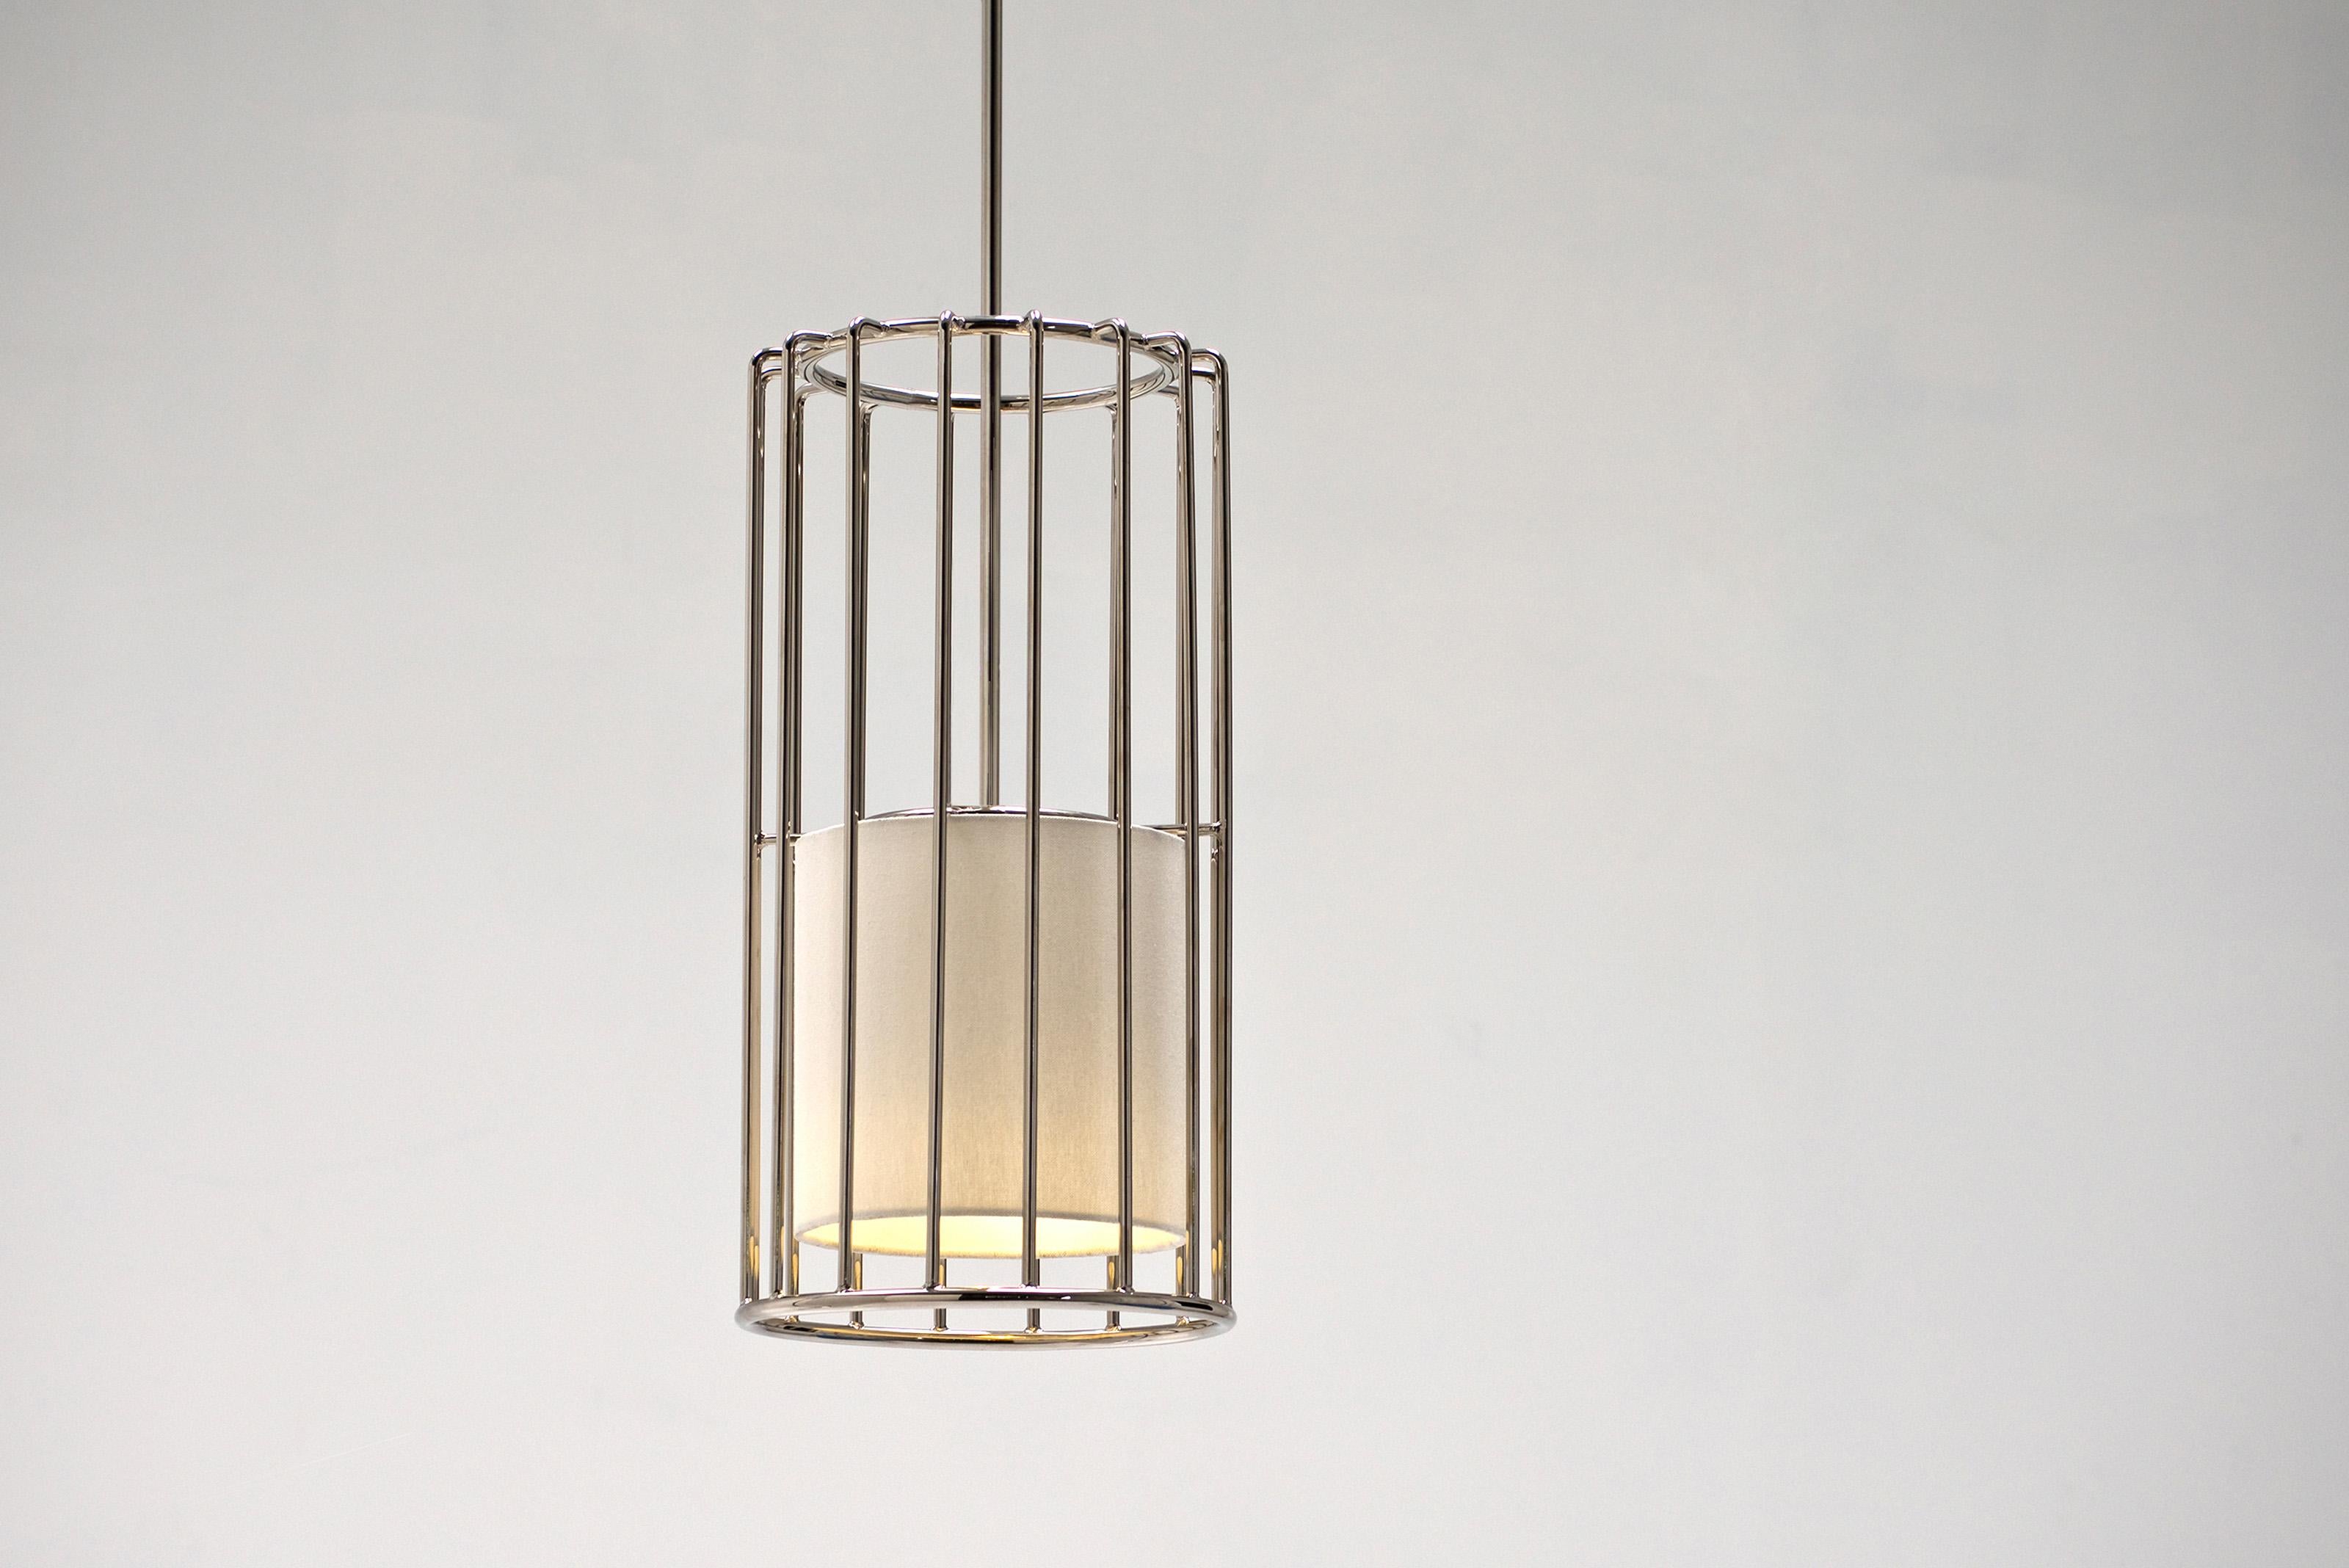 Other Inner Beauty Pendant Light by Phase Design For Sale